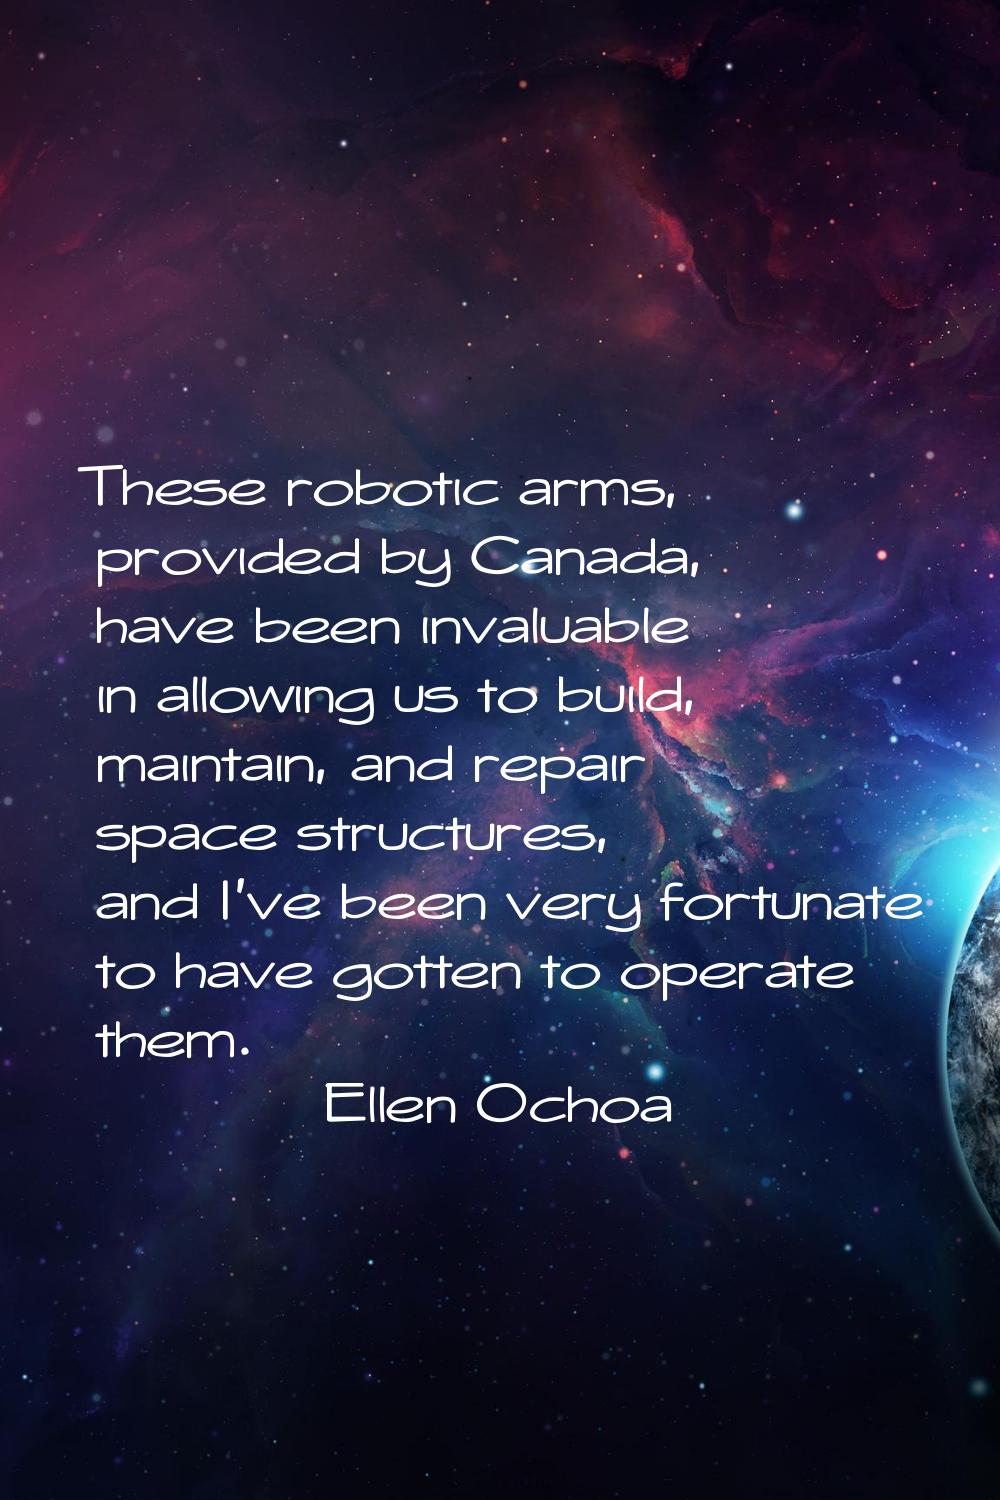 These robotic arms, provided by Canada, have been invaluable in allowing us to build, maintain, and